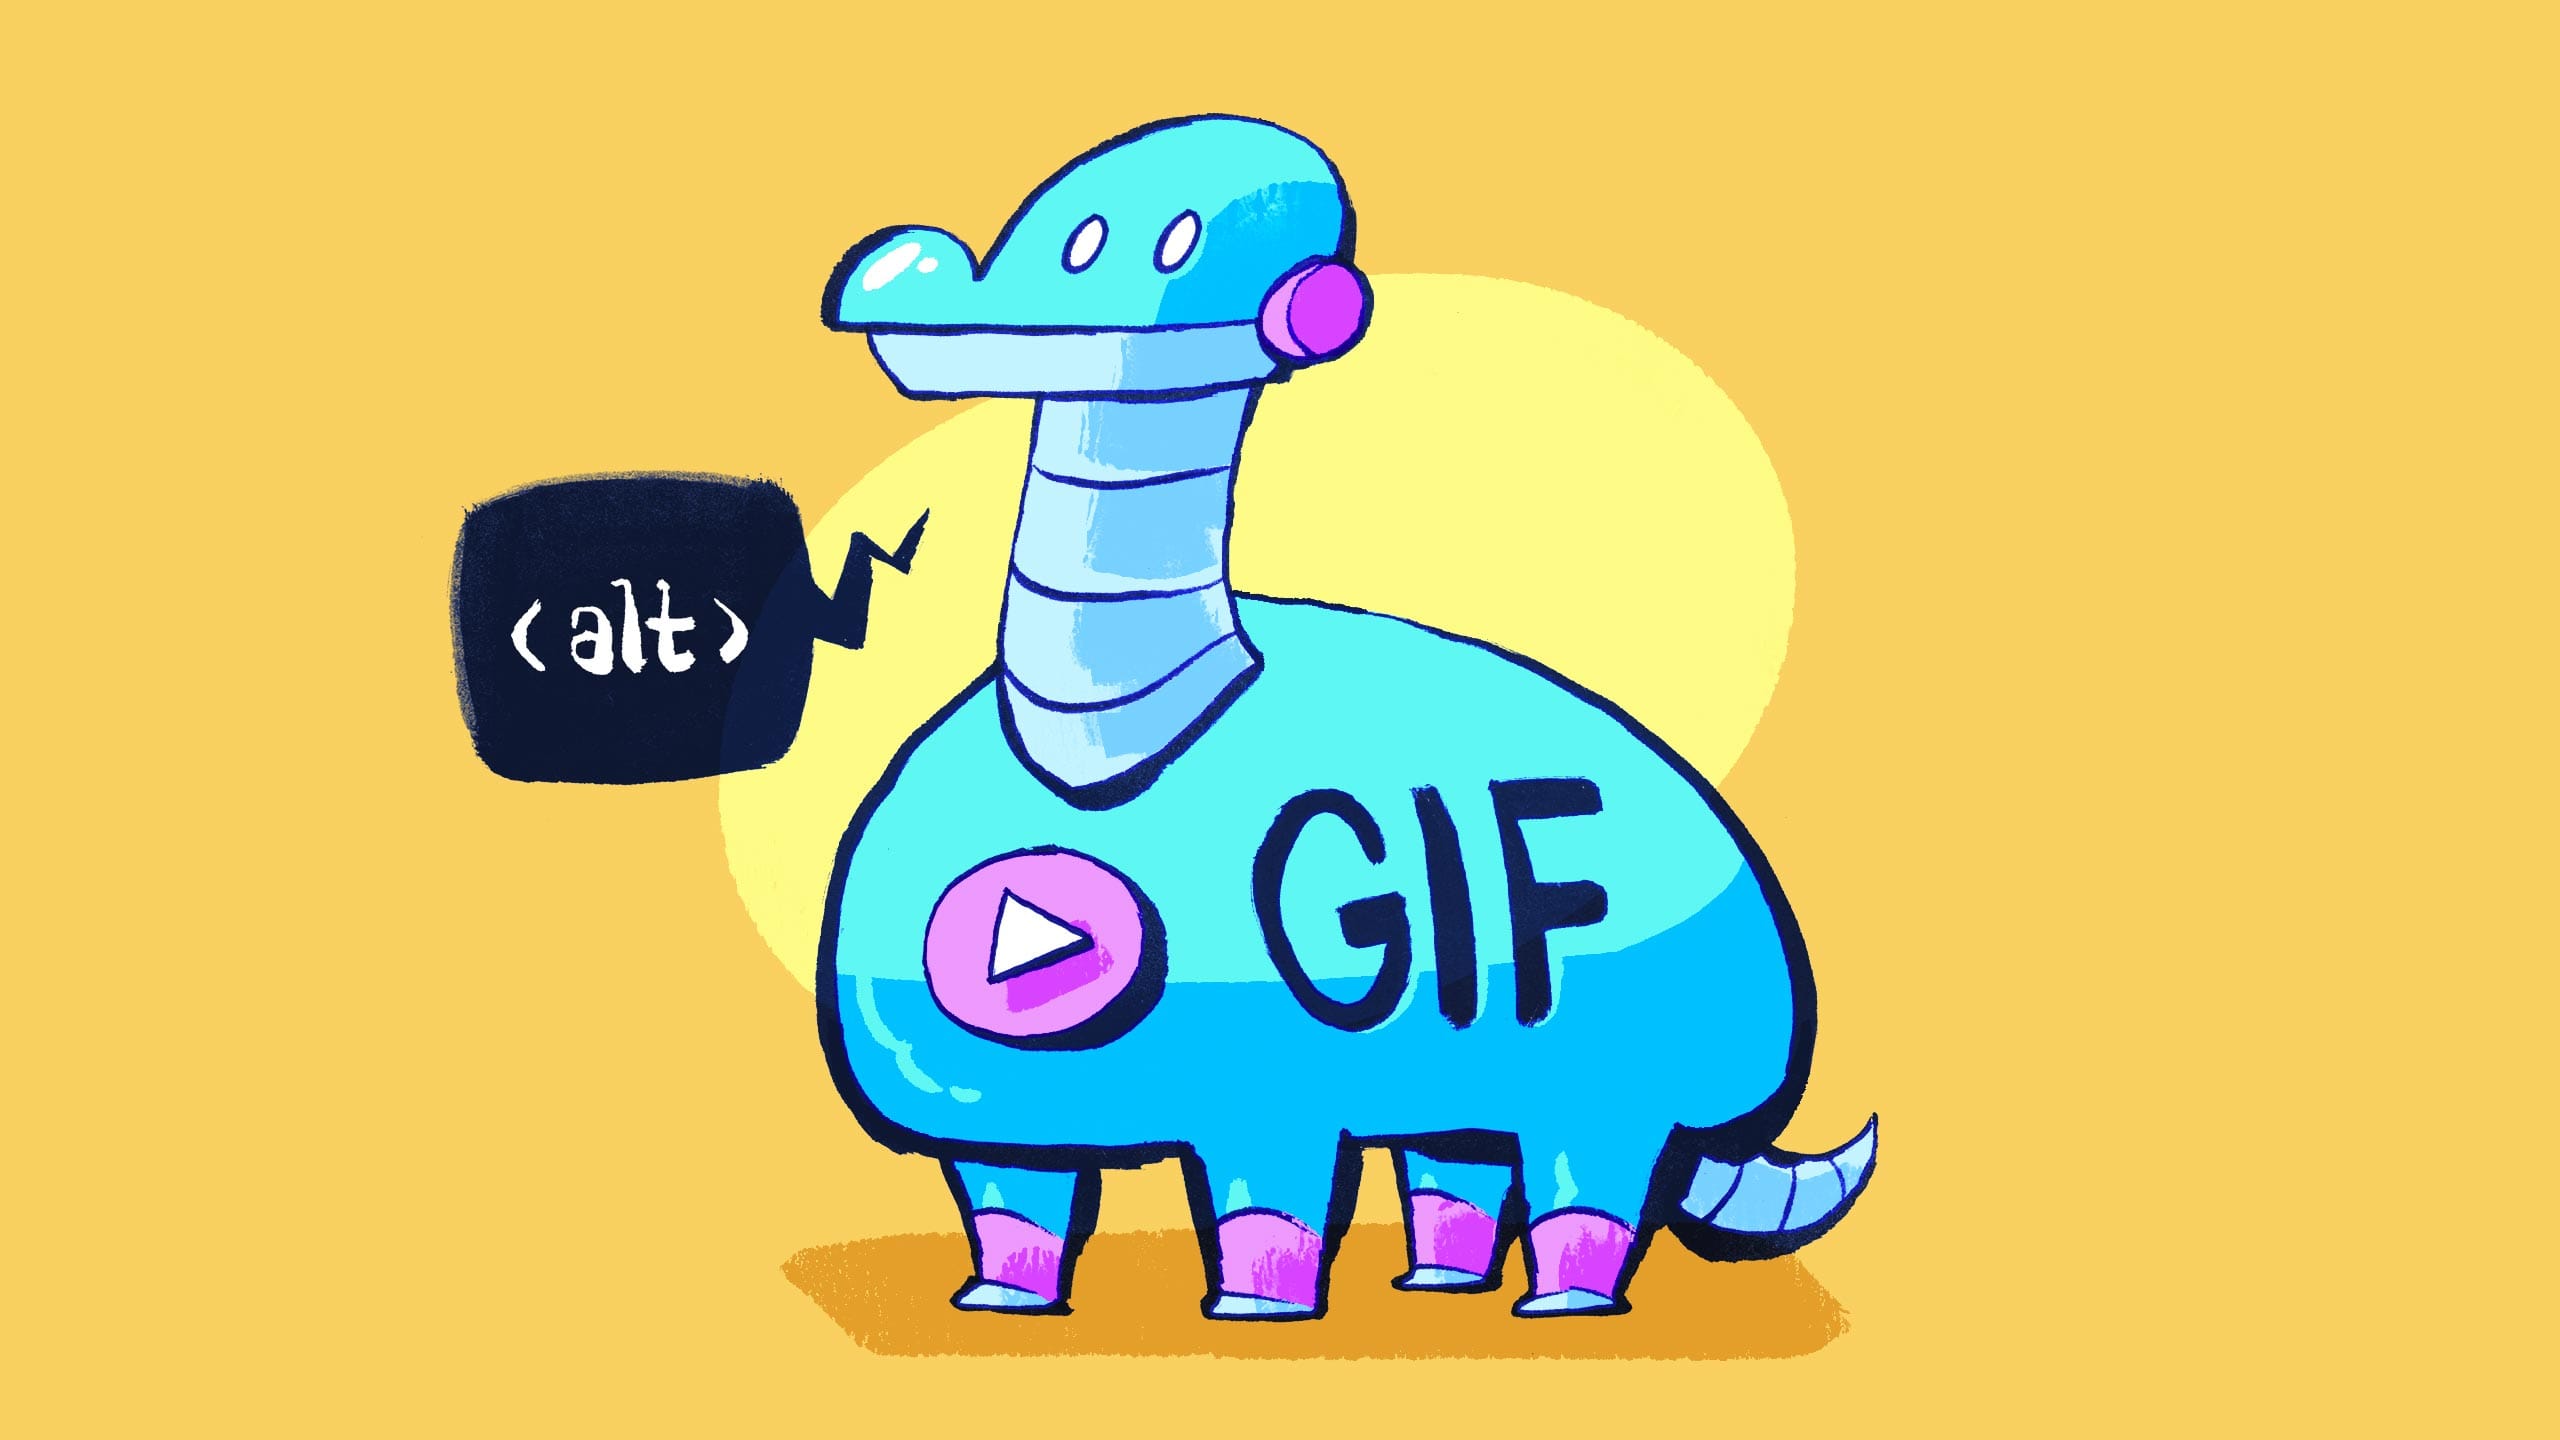 A robotic dinosaur labeled 'GIF', with a play button representing playback control, and a word balloon representing alternative text